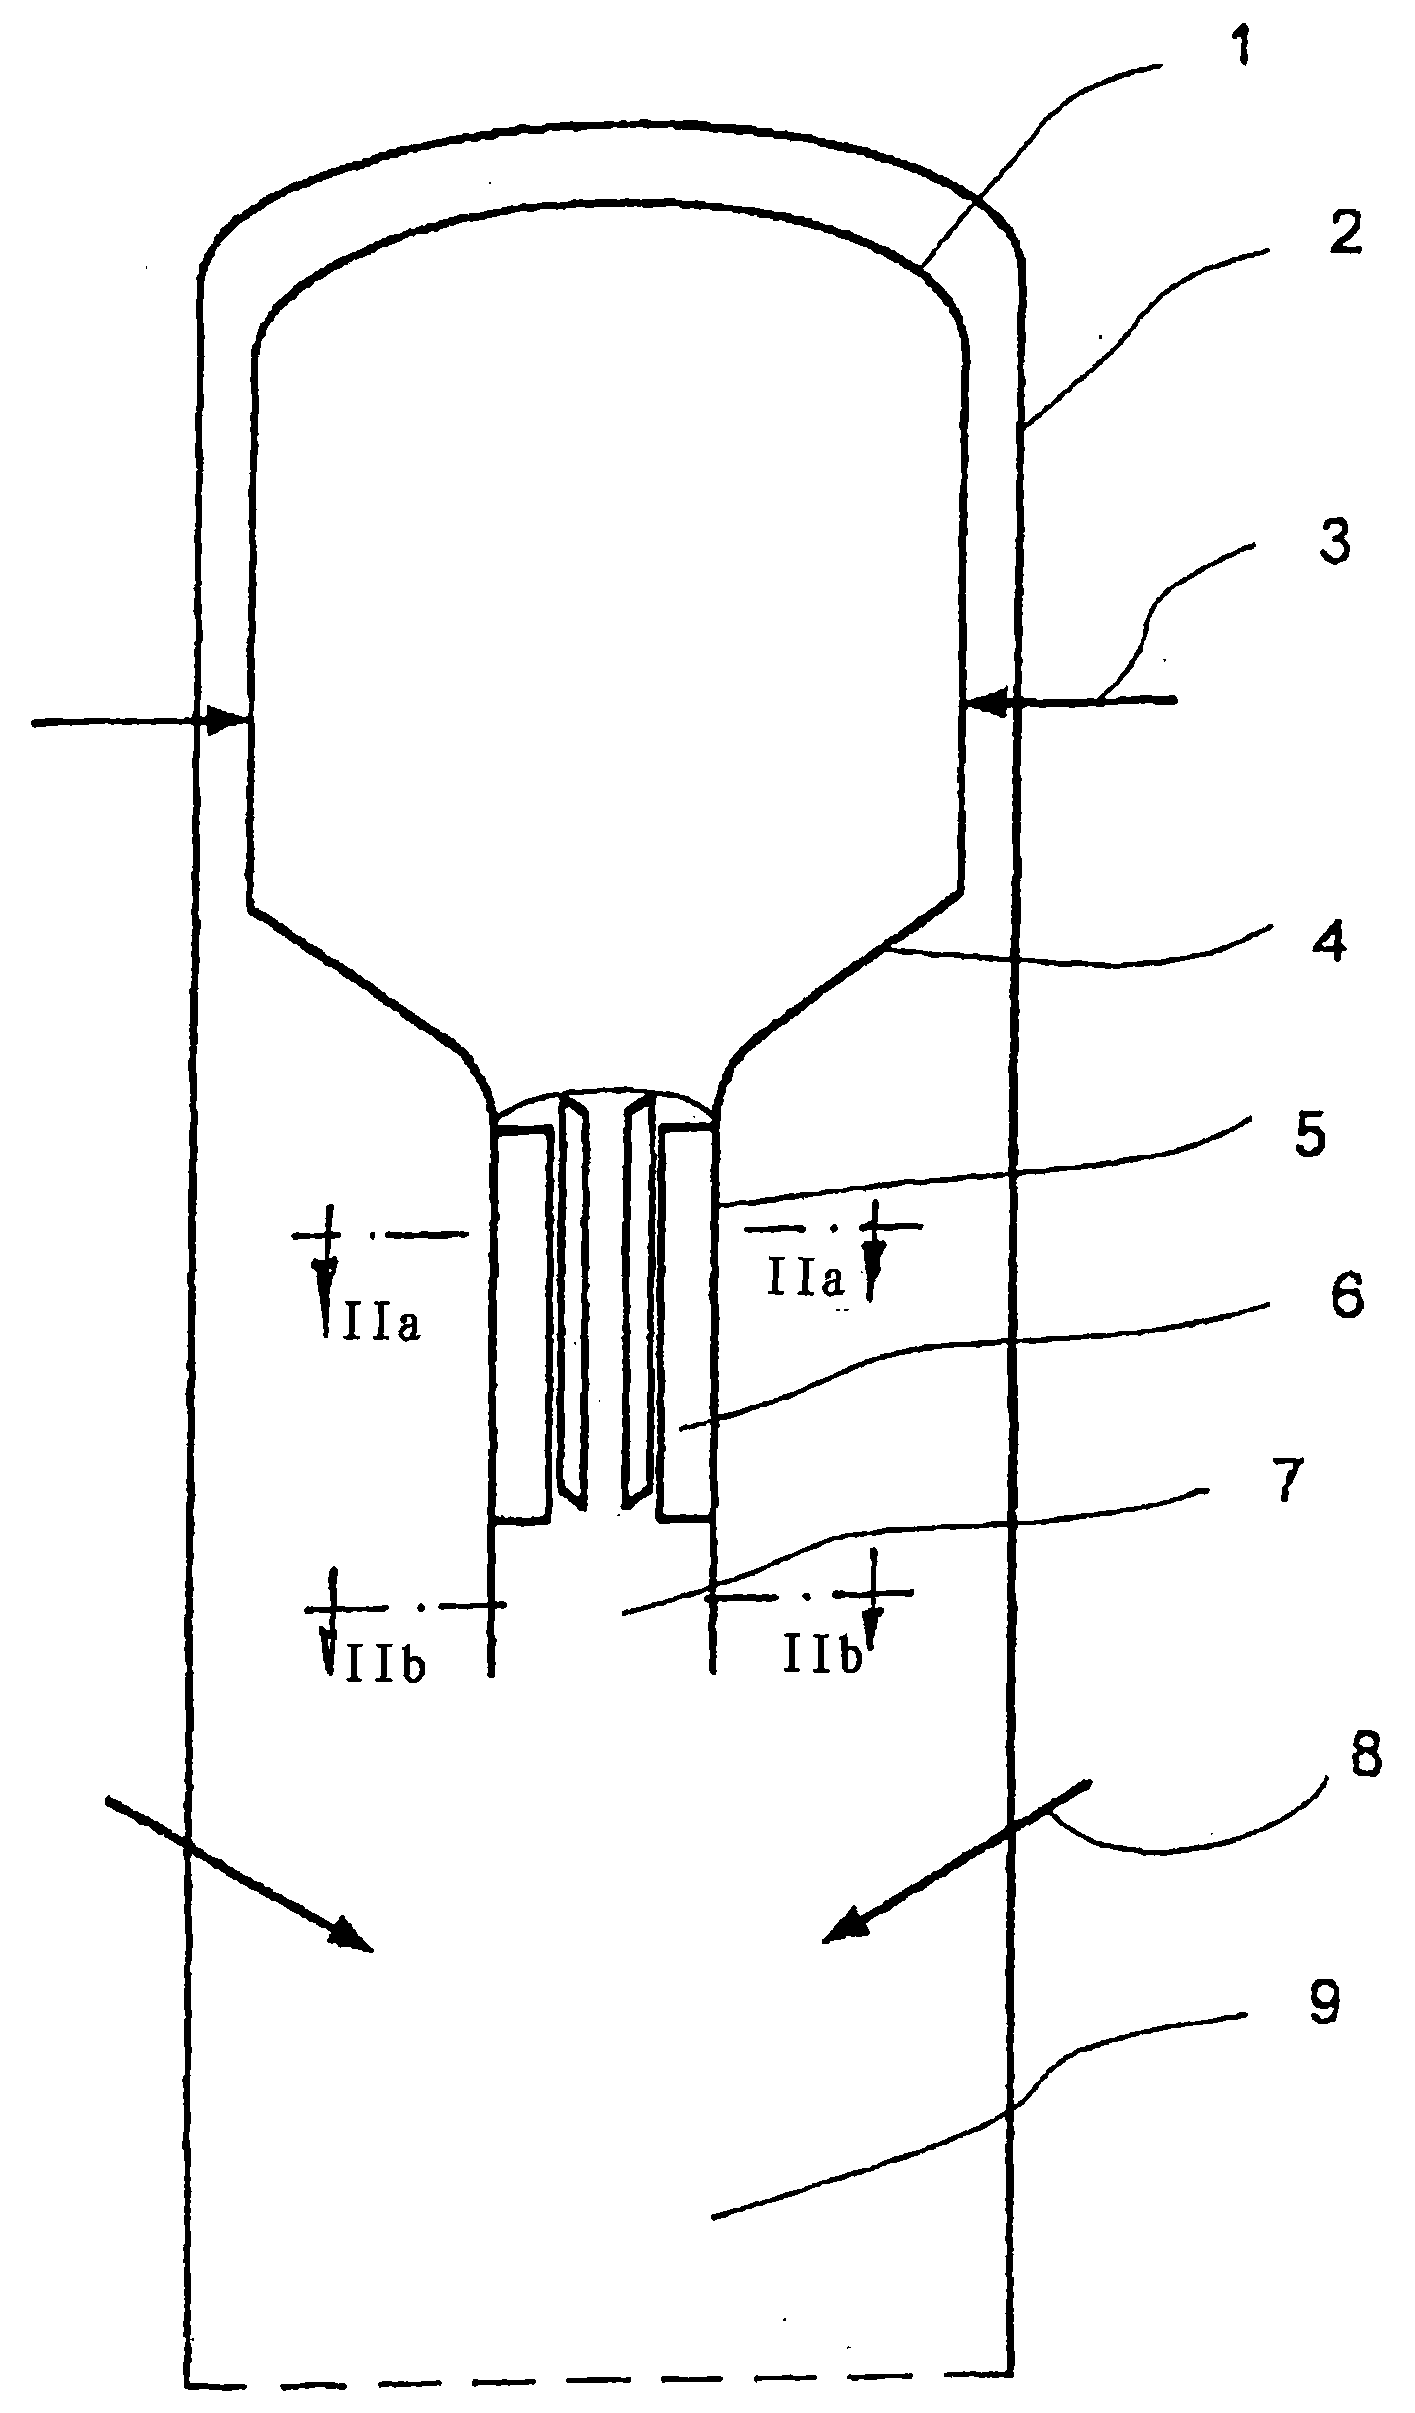 Device for producing synthesis gas with a gasification reactor and connecting quenching chamber